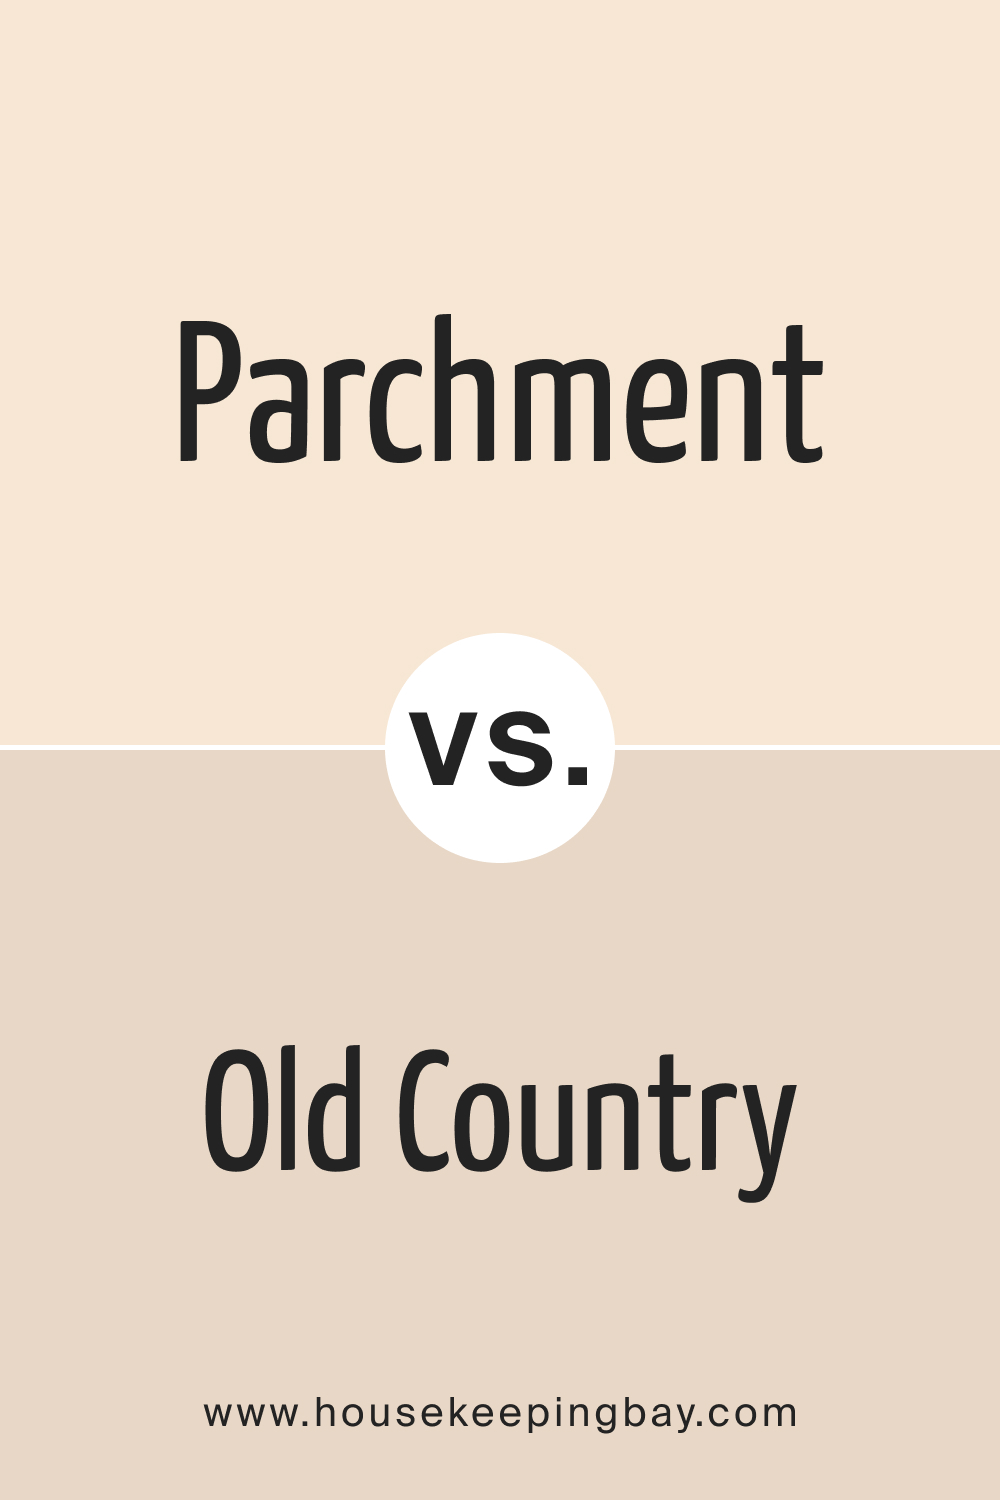 Parchment OC 78 vs. BM OC 76 Old Country